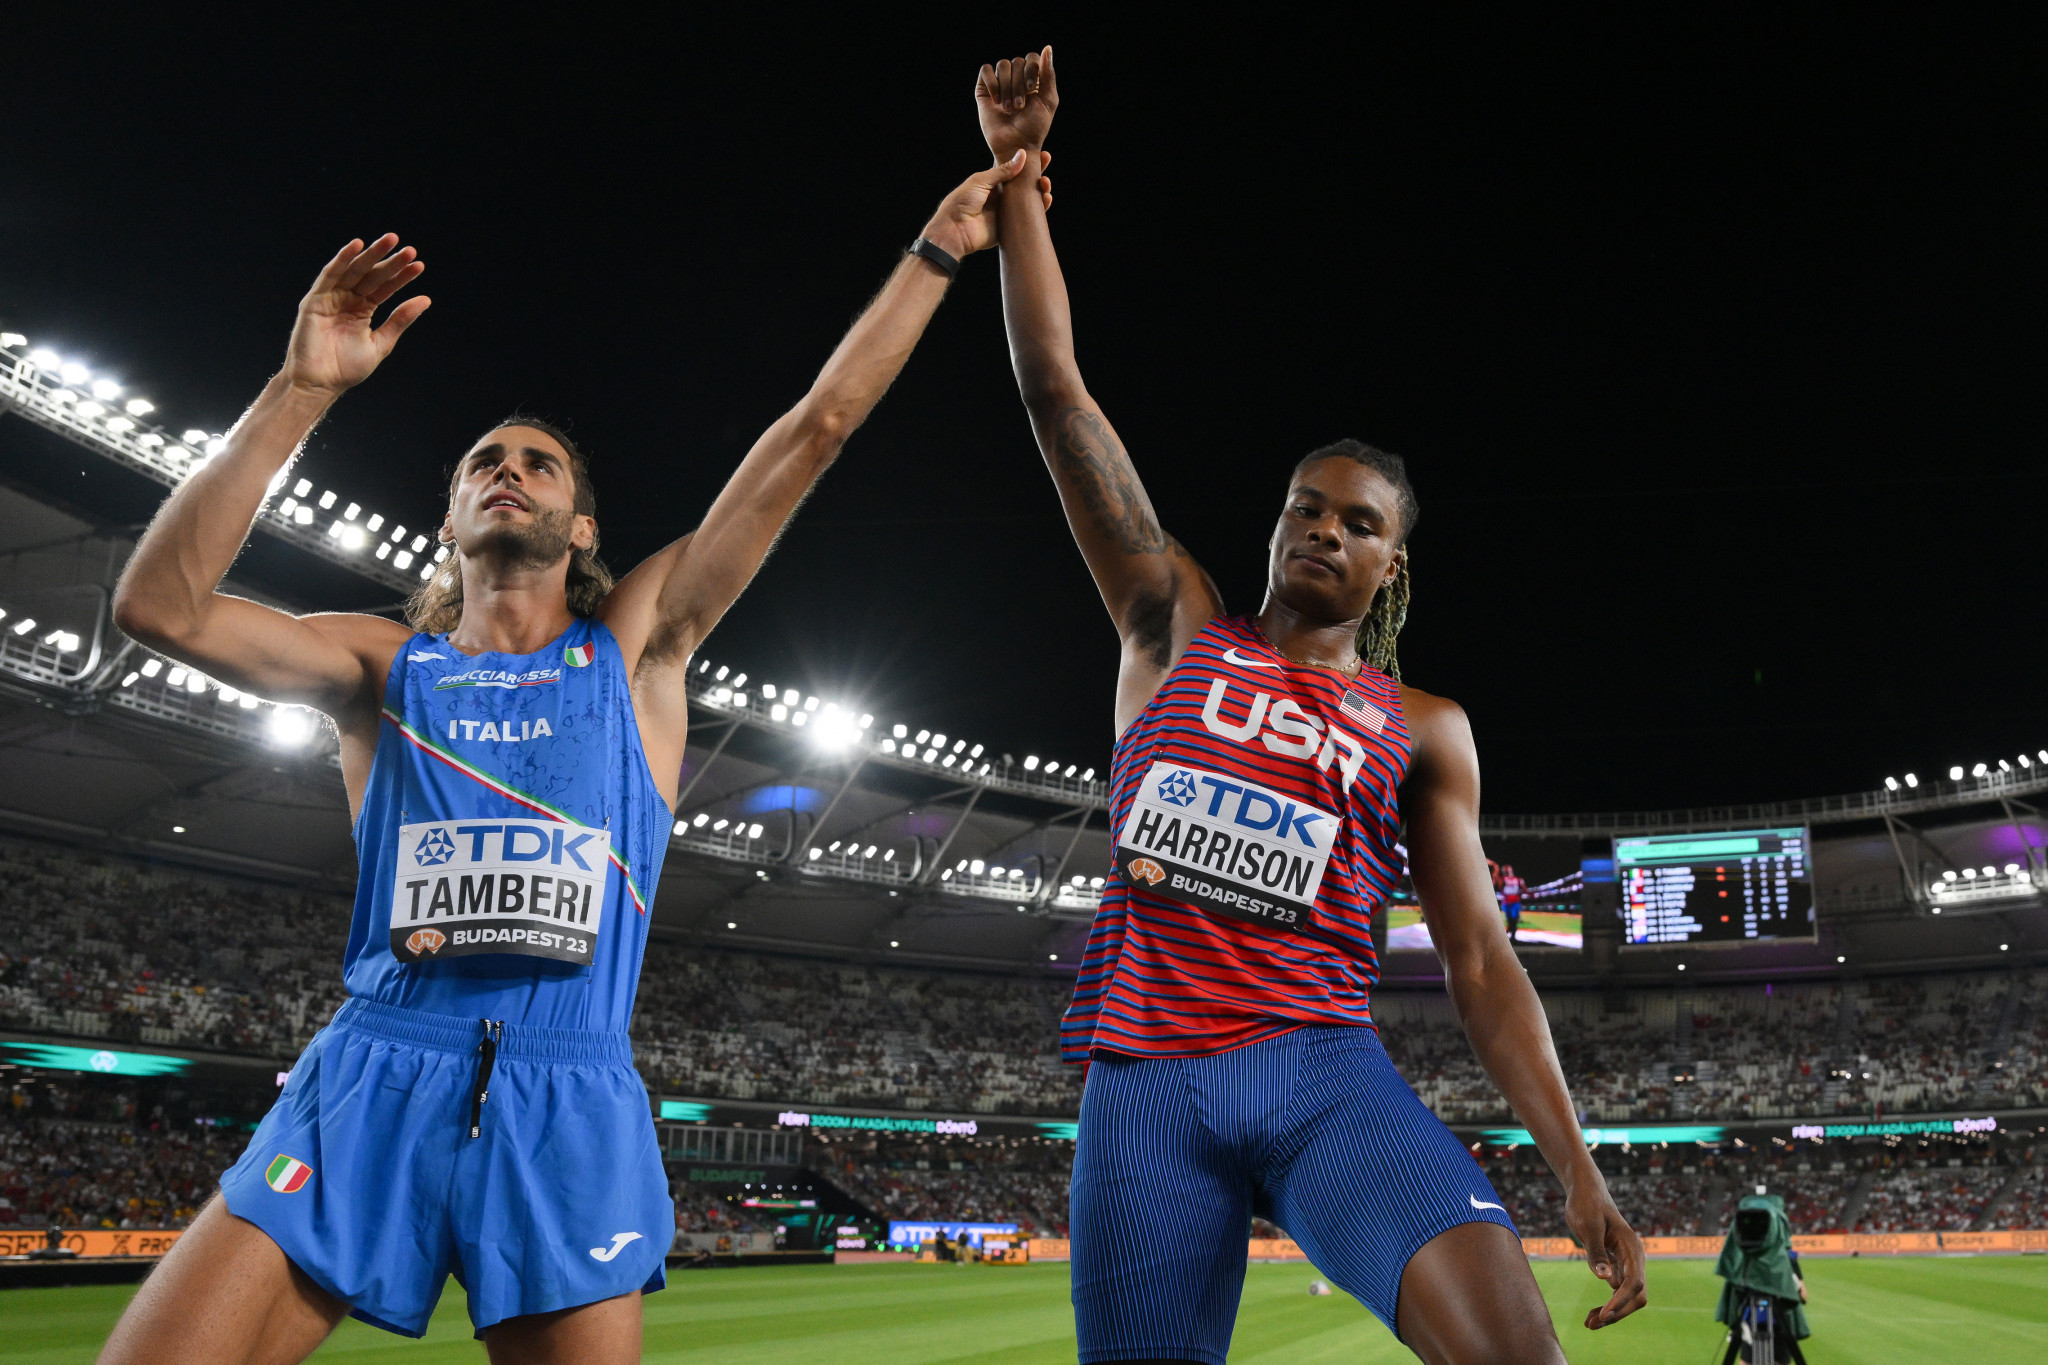 Gianmarco Tamberi of Italy, left, took men's high jump gold with a world-leading 2.36 metres, with JuVaughn Harrison of the United States, right, taking silver ©Getty Images